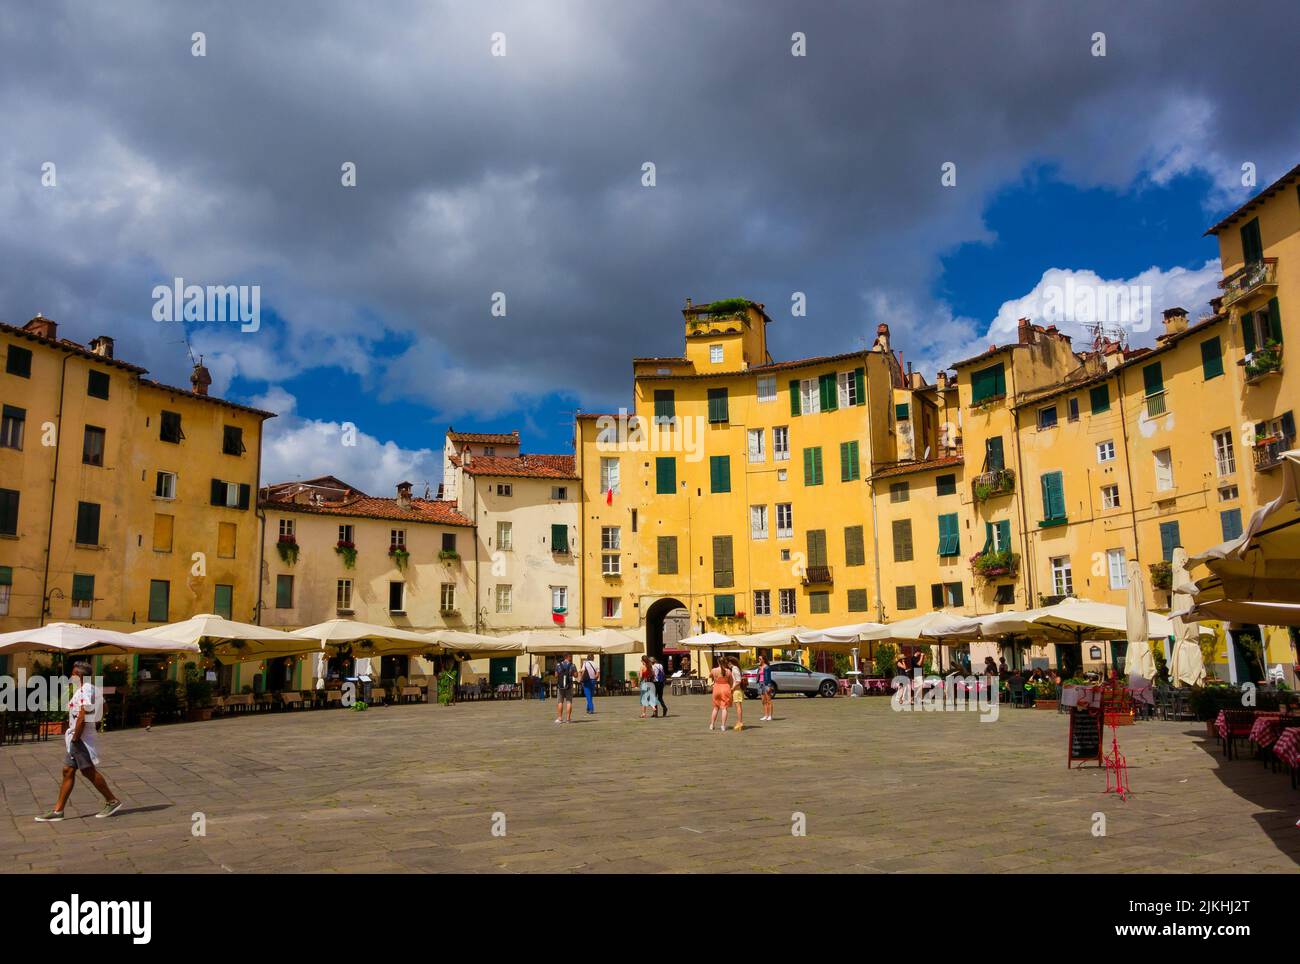 The famous Piazza dell'Anfiteatro (Amphitheater Square) in the historic center of Lucca, with houses, shops and restaurants built over ancient roman a Stock Photo